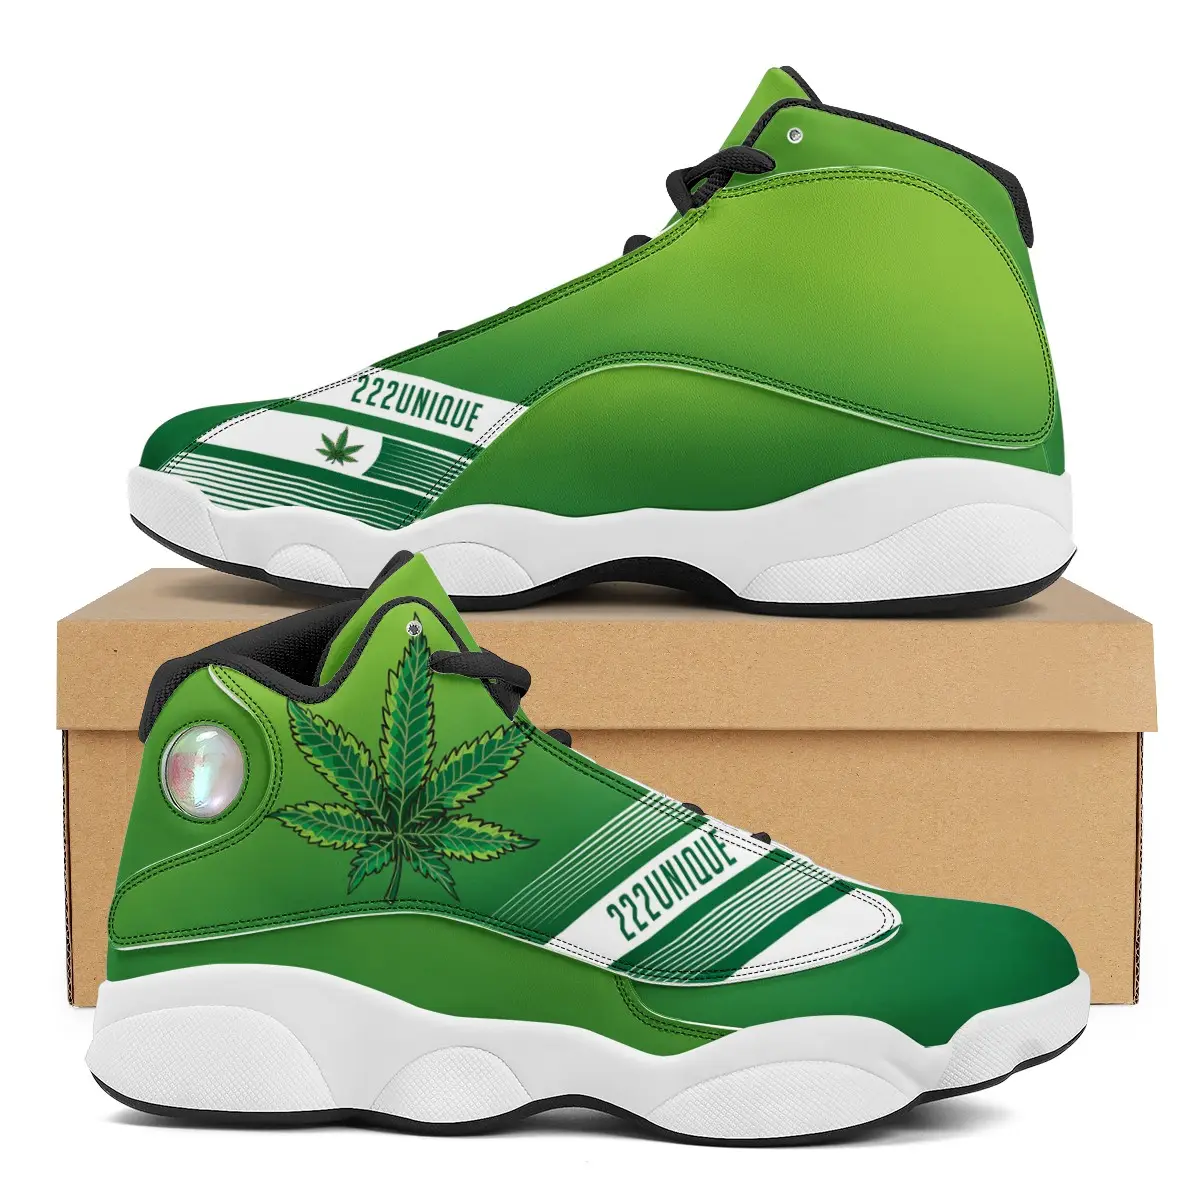 Wholesale Green Youth Boy's Stylish Basketball Sneakers 222 UNIQUE Weed Leaf Casual Footwear with Slash Designs Basketball Shoes